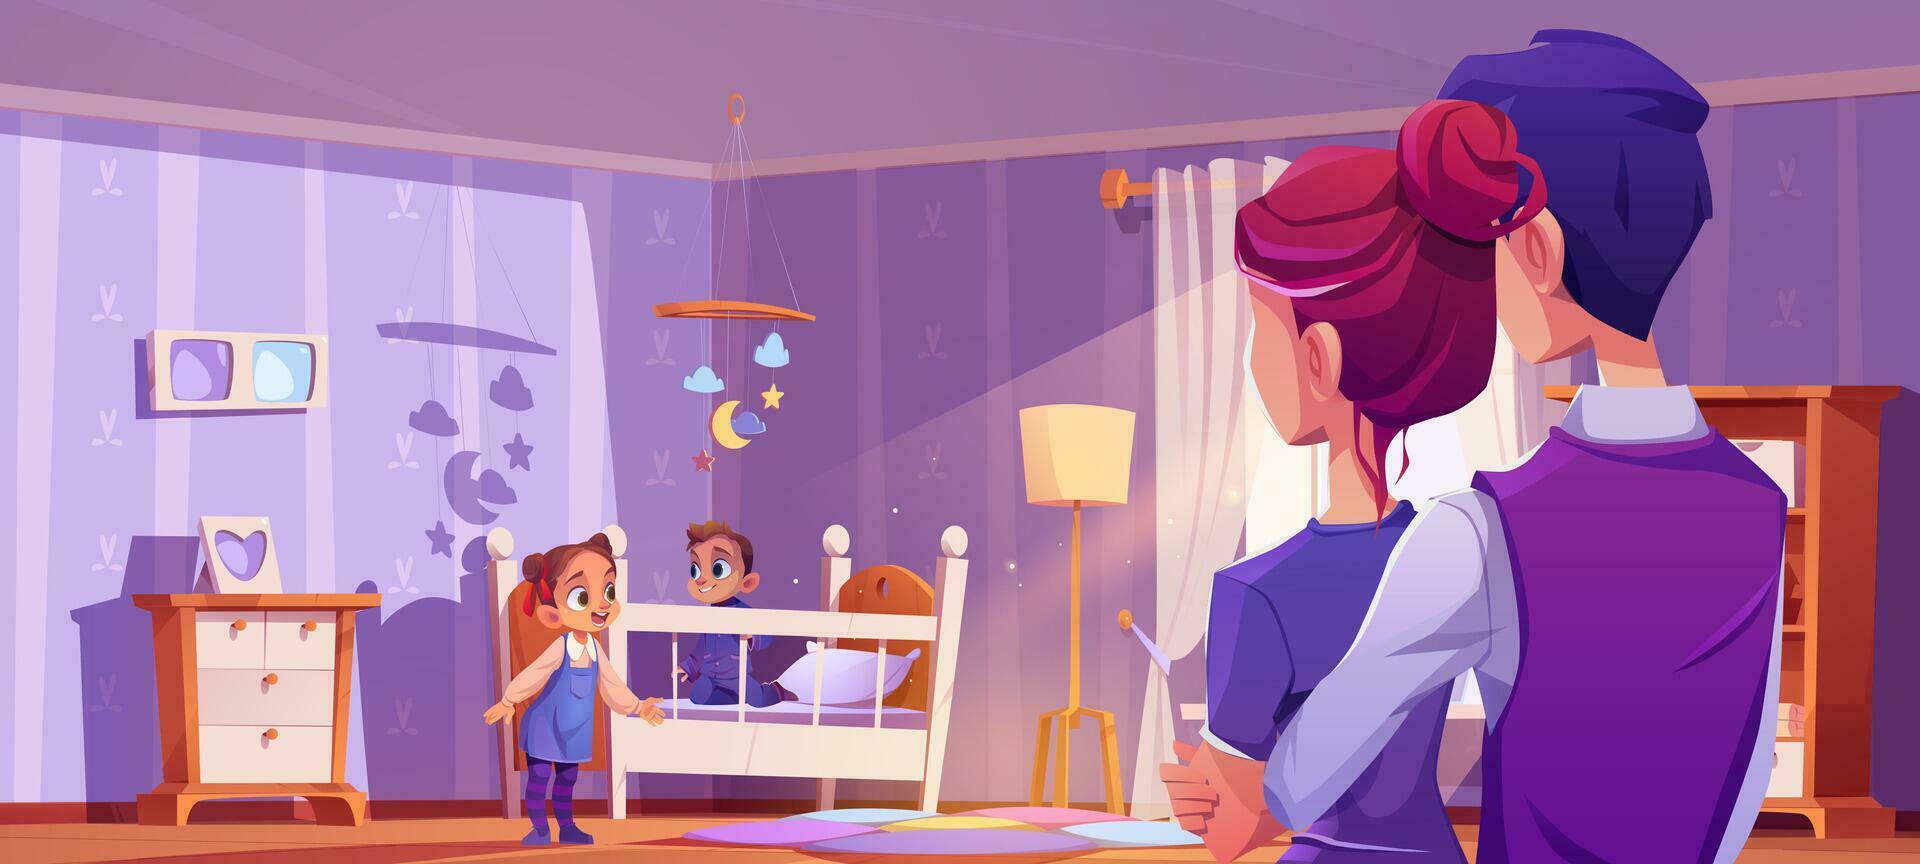 Baby bedroom interior and parents watching on kid vector